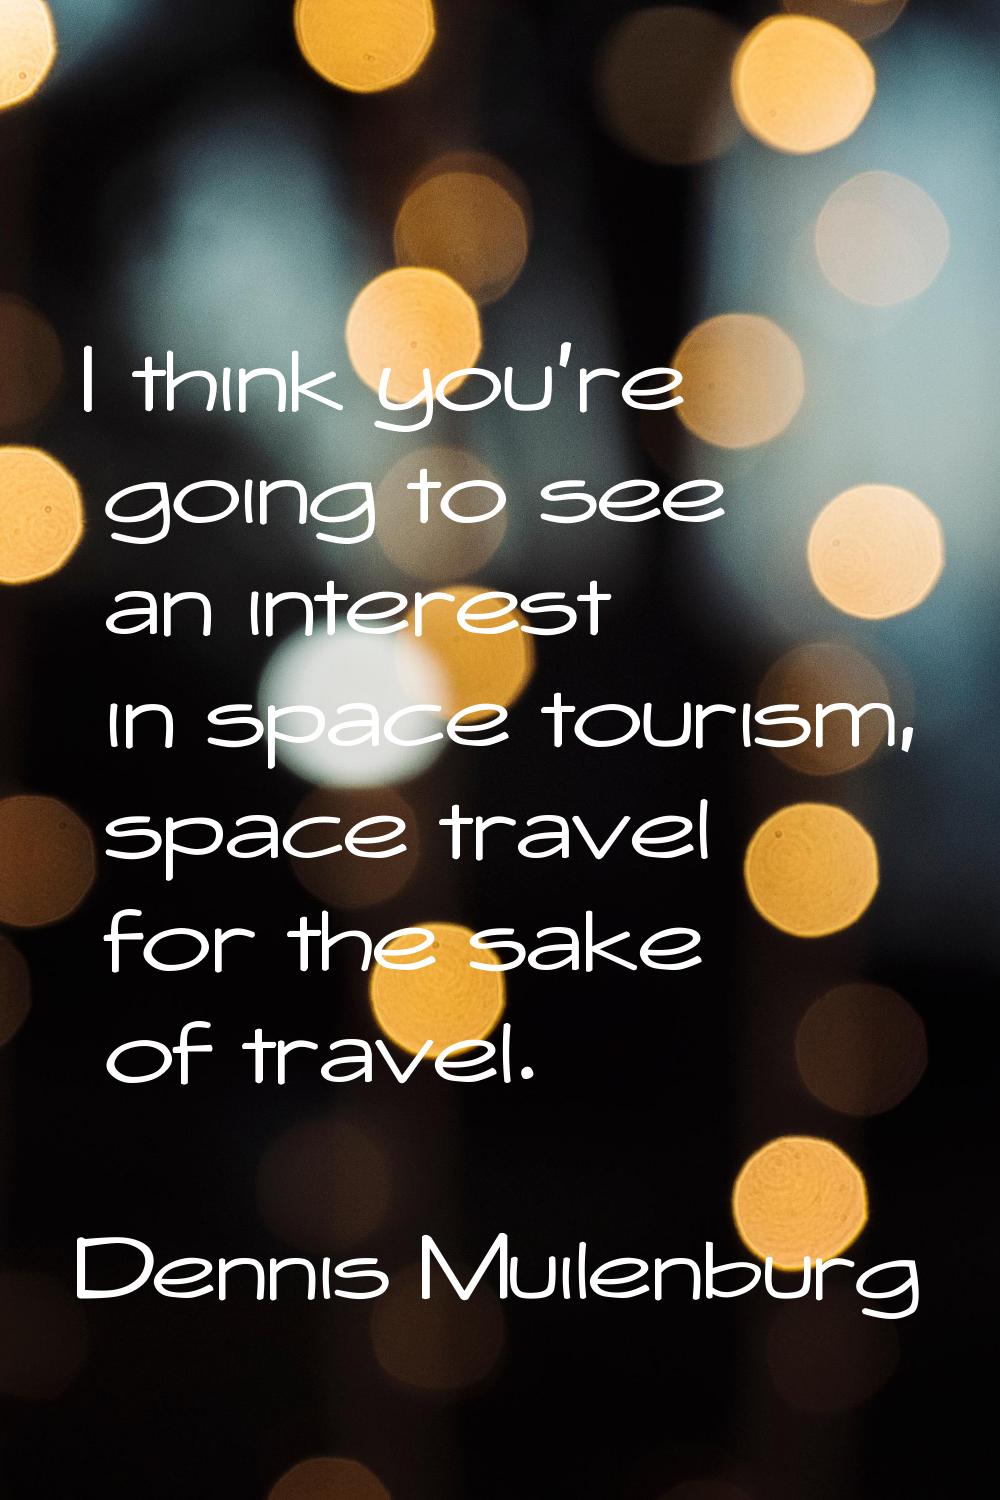 I think you're going to see an interest in space tourism, space travel for the sake of travel.